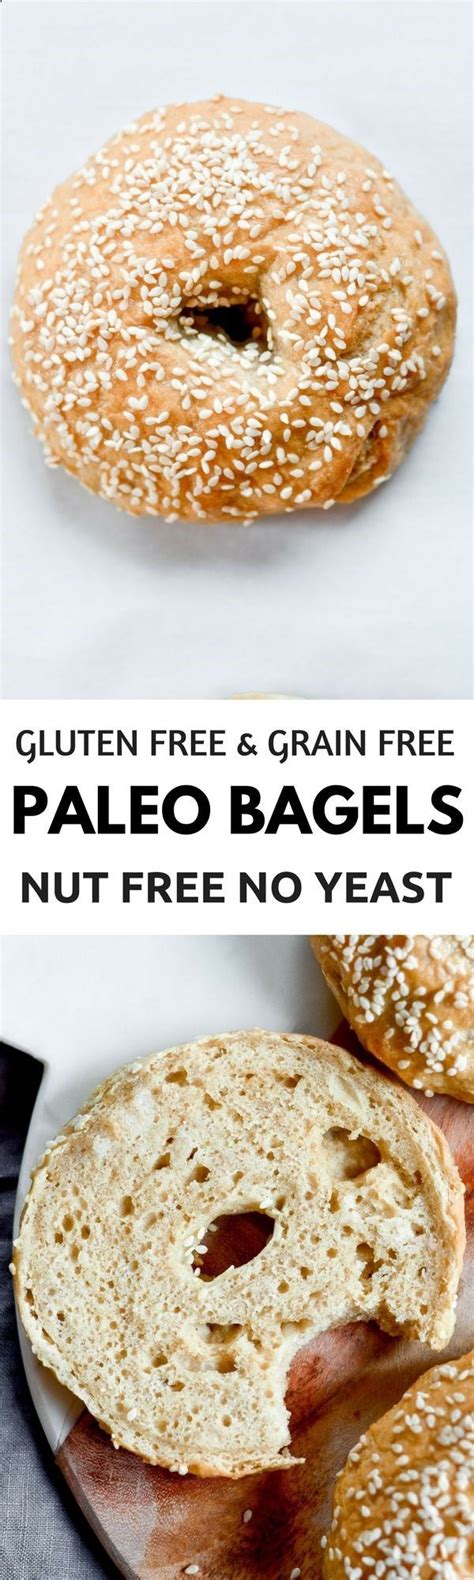 Combine the almond flour, arrowroot flour, baking powder, and sea salt in a large bowl. Gluten free, grain free, nut free, no yeast, easy, healthy ...